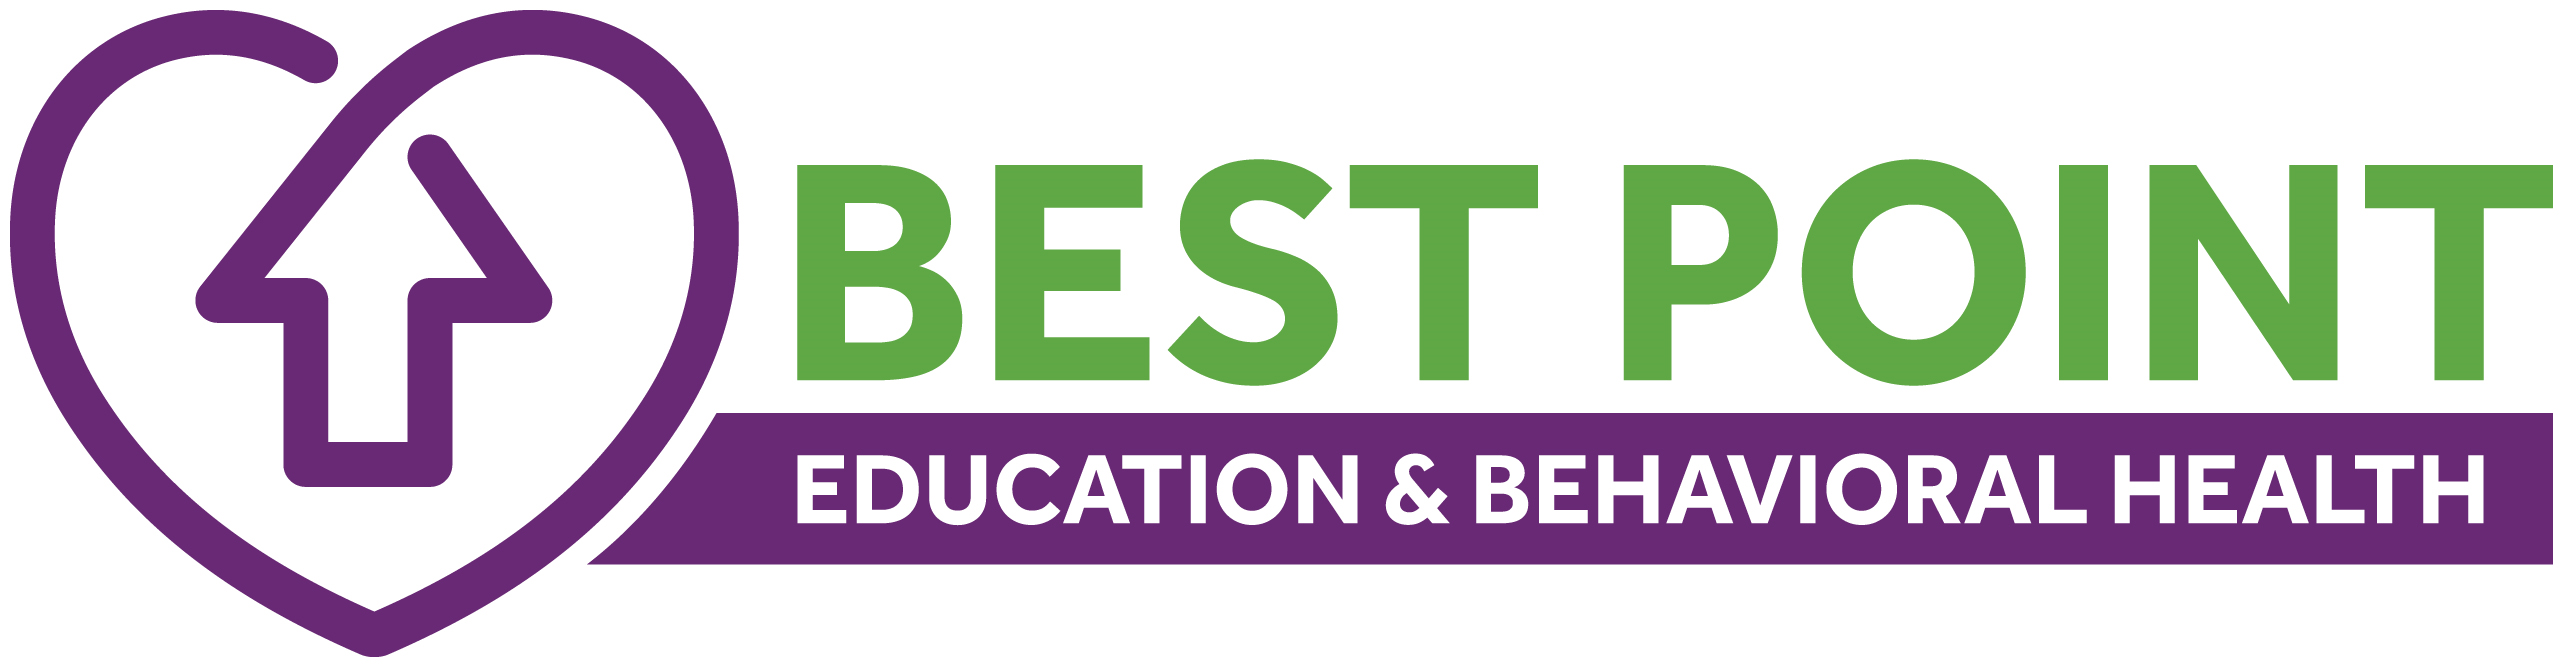 Best Point Education and Behavioral Health Company Logo